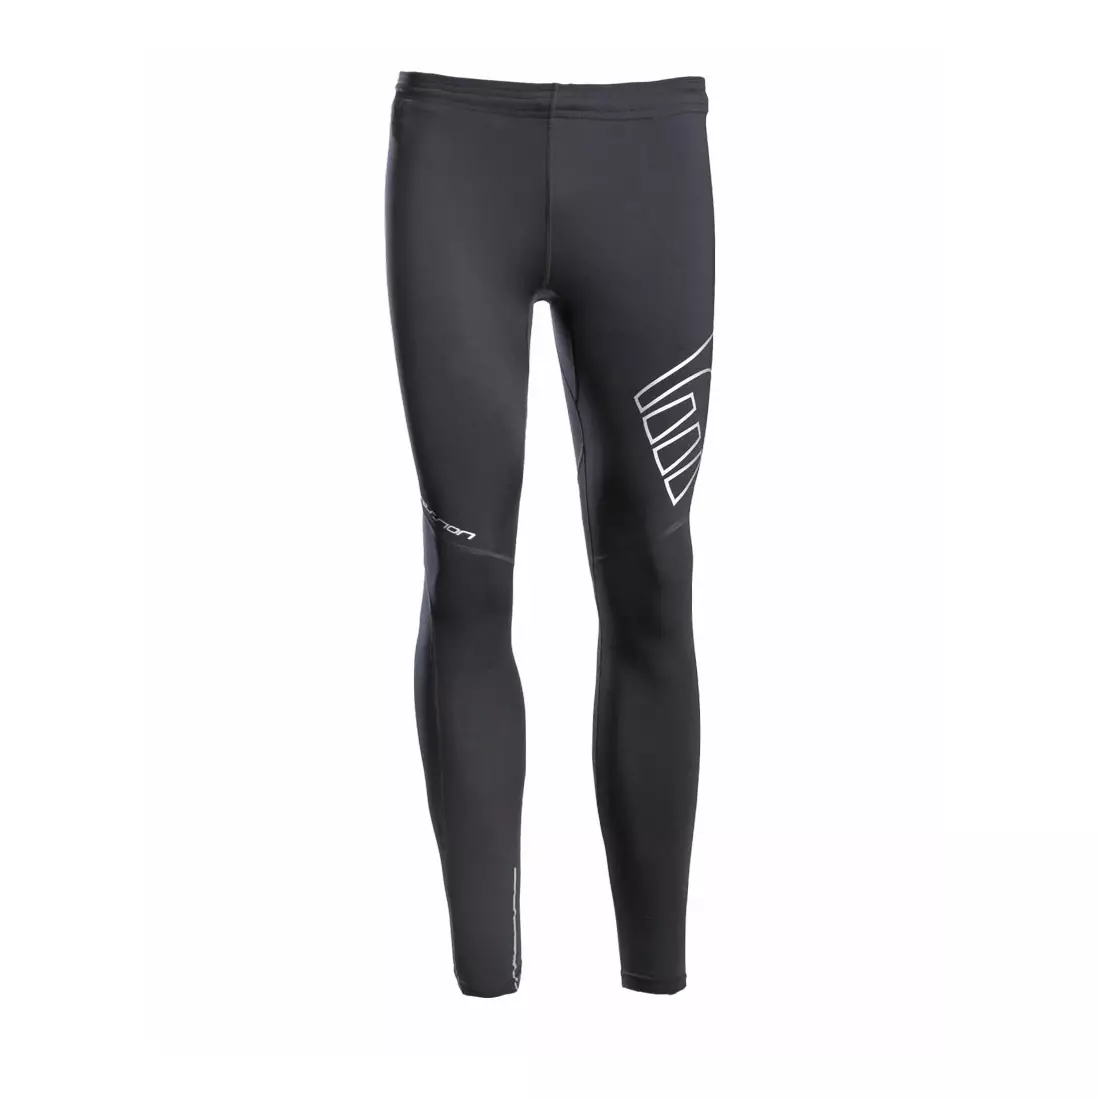 NEWLINE COMPRESSION THERMAL TIGHTS 11125-060 - men's compression pants